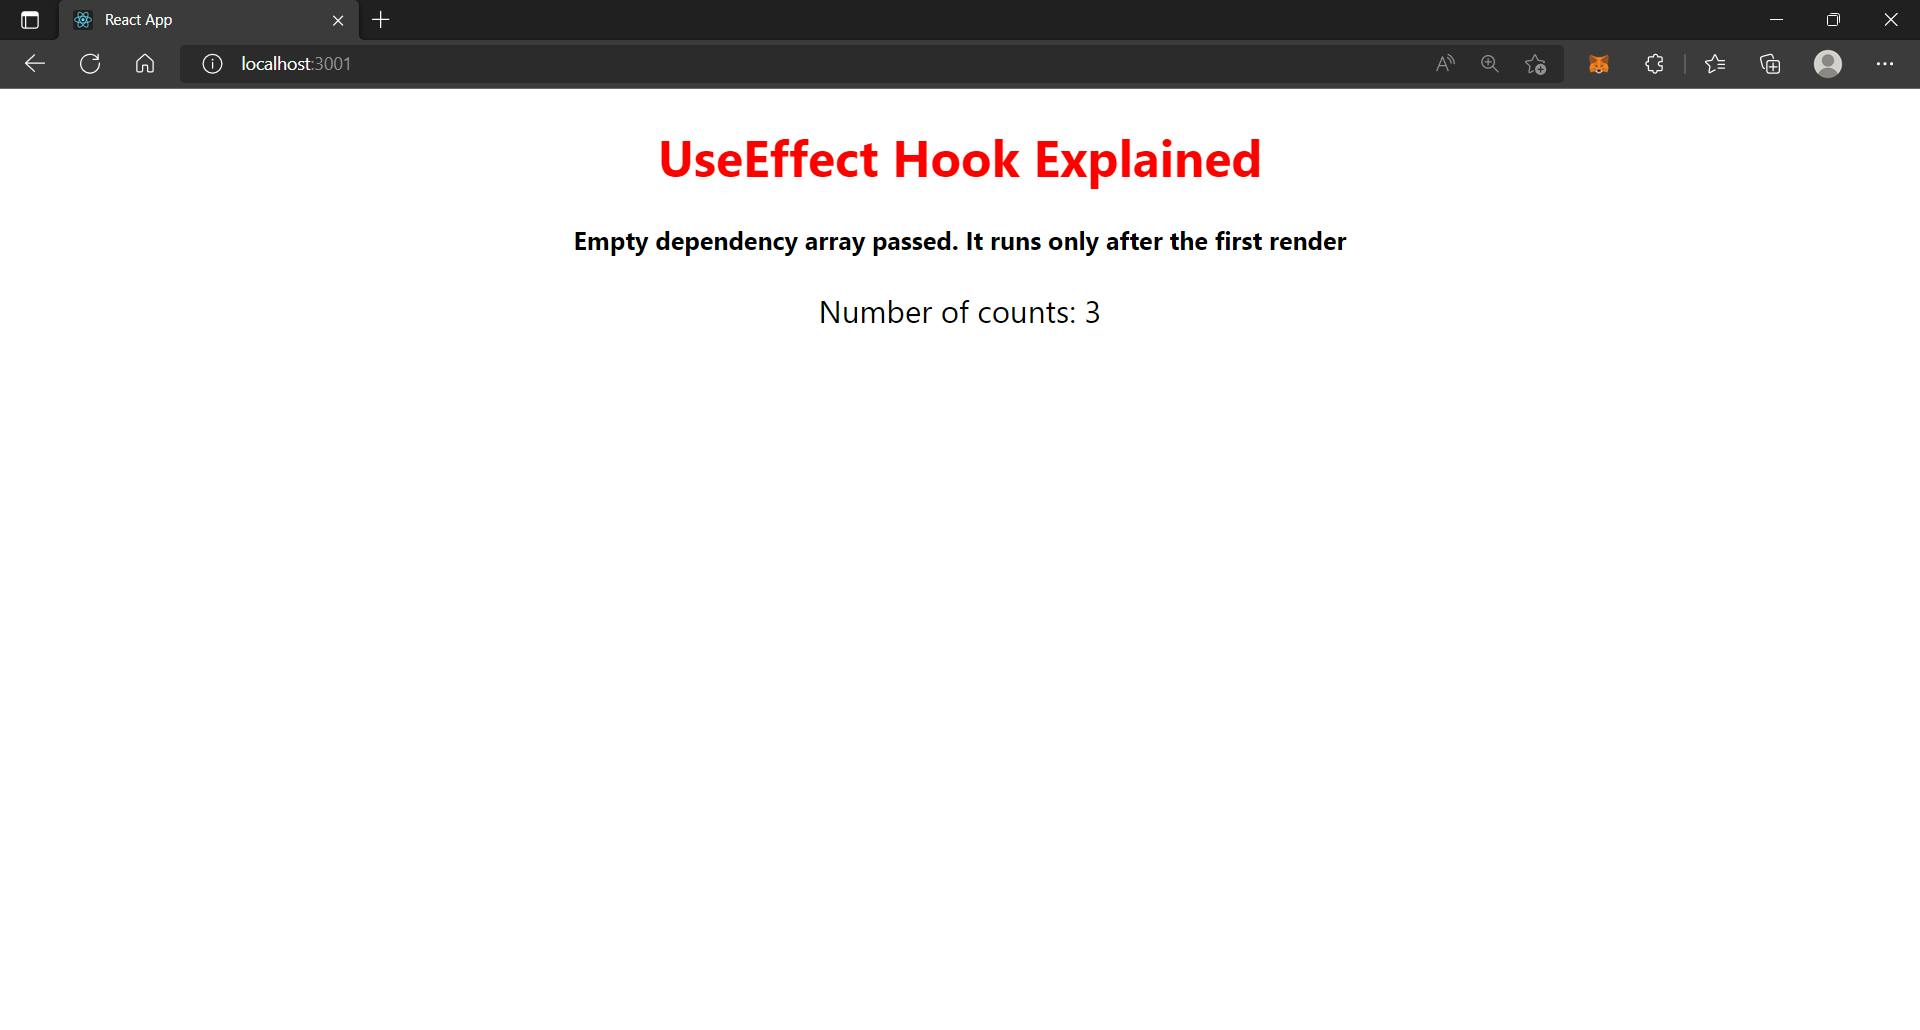 Demonstration of the useEffect Hook with an empty dependency array in a timer function